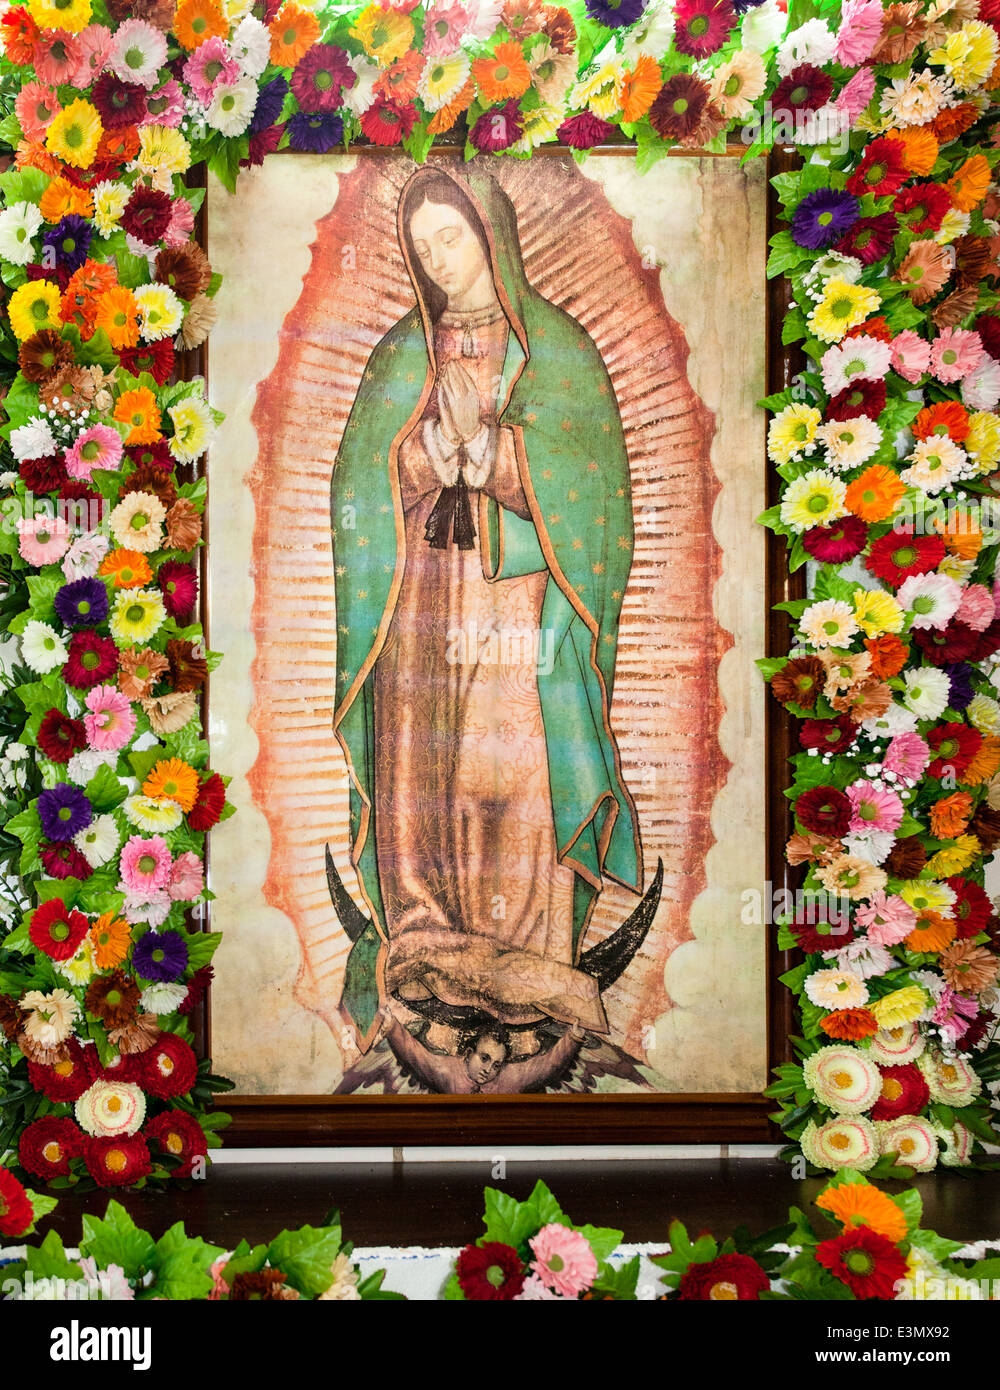 The Virgin of Guadalupe framed by flowers in the Villahermosa, Tabasco market in Mexico. Stock Photo